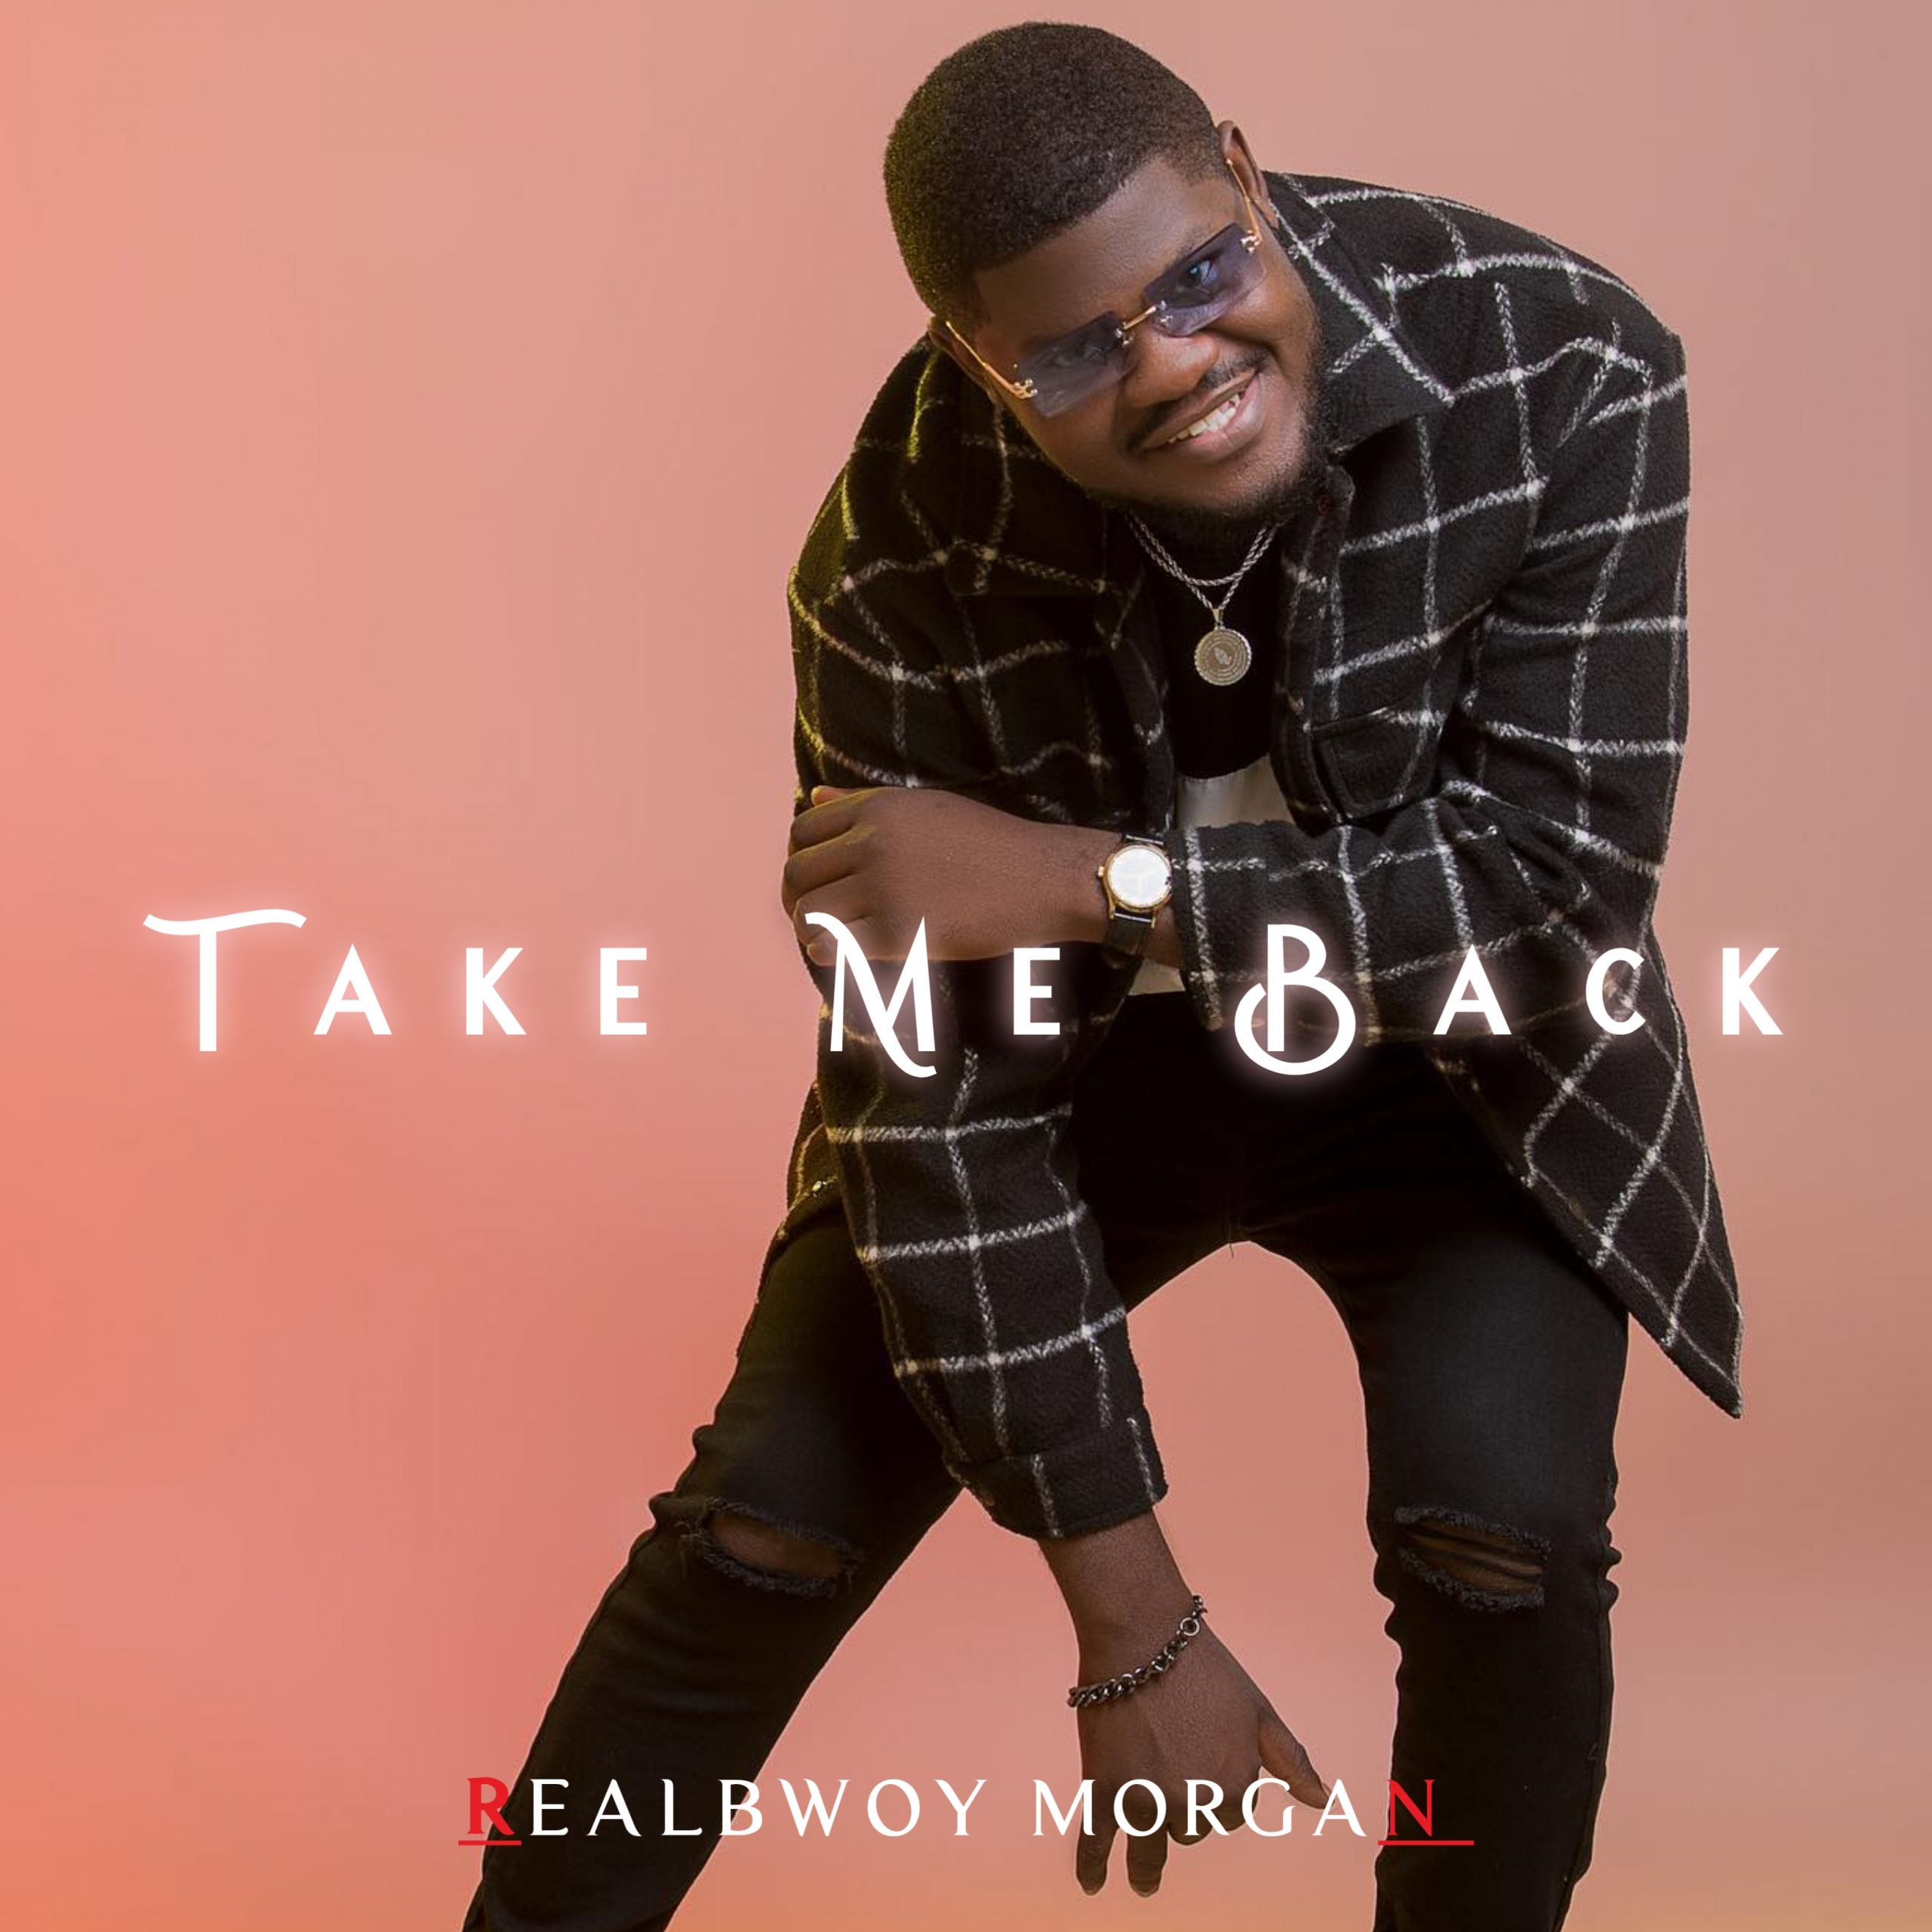 RealBwoy Morgan's song titled "Take Me Back" has leaked while in custody